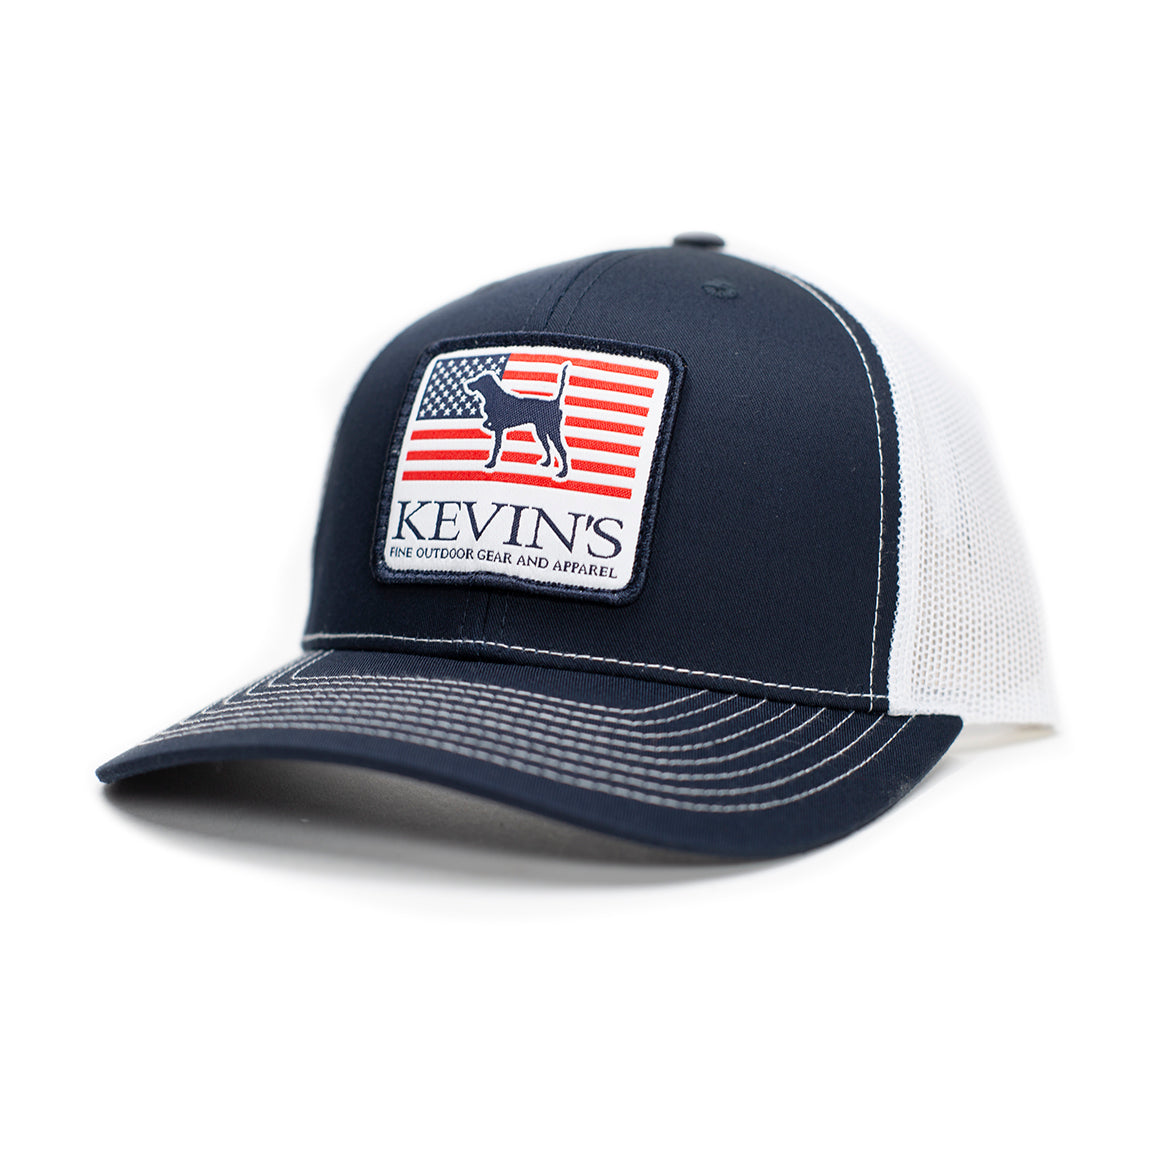 Kevin's Richardson Pointer Flag Cap-Men's Accessories-Navy/White-ONE SIZE-Kevin's Fine Outdoor Gear & Apparel